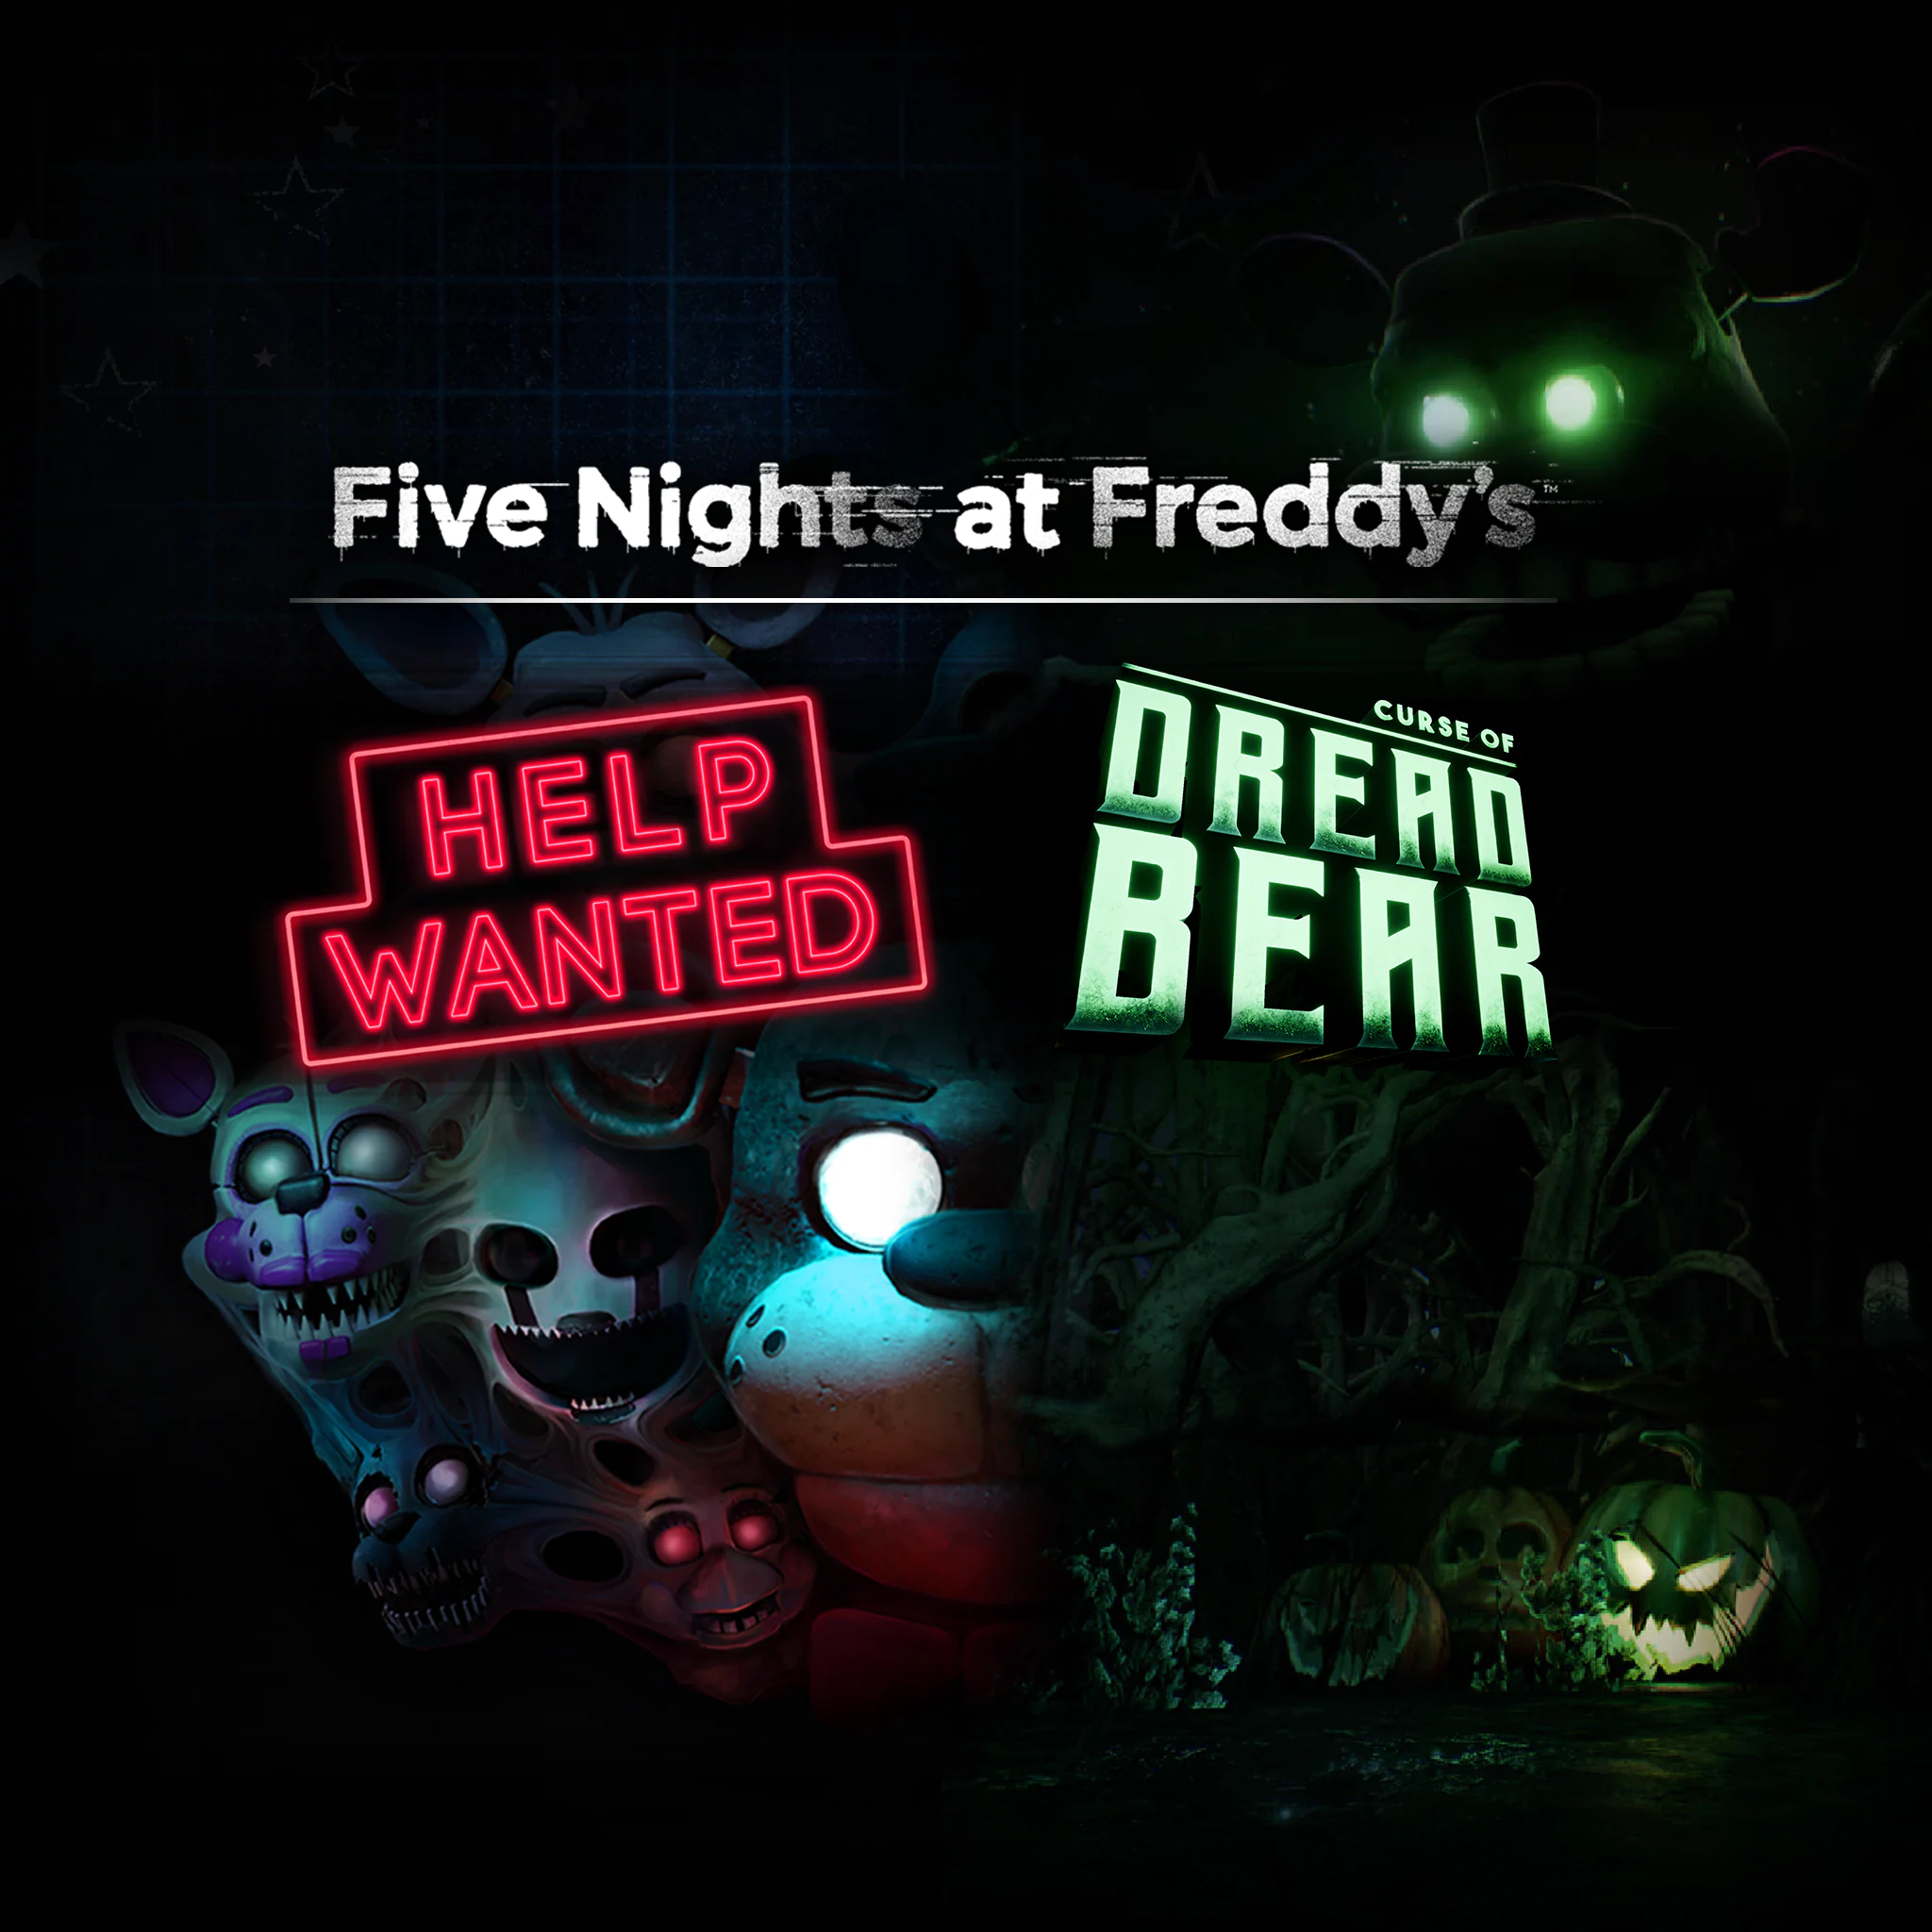 ps4 vr five nights at freddy's game